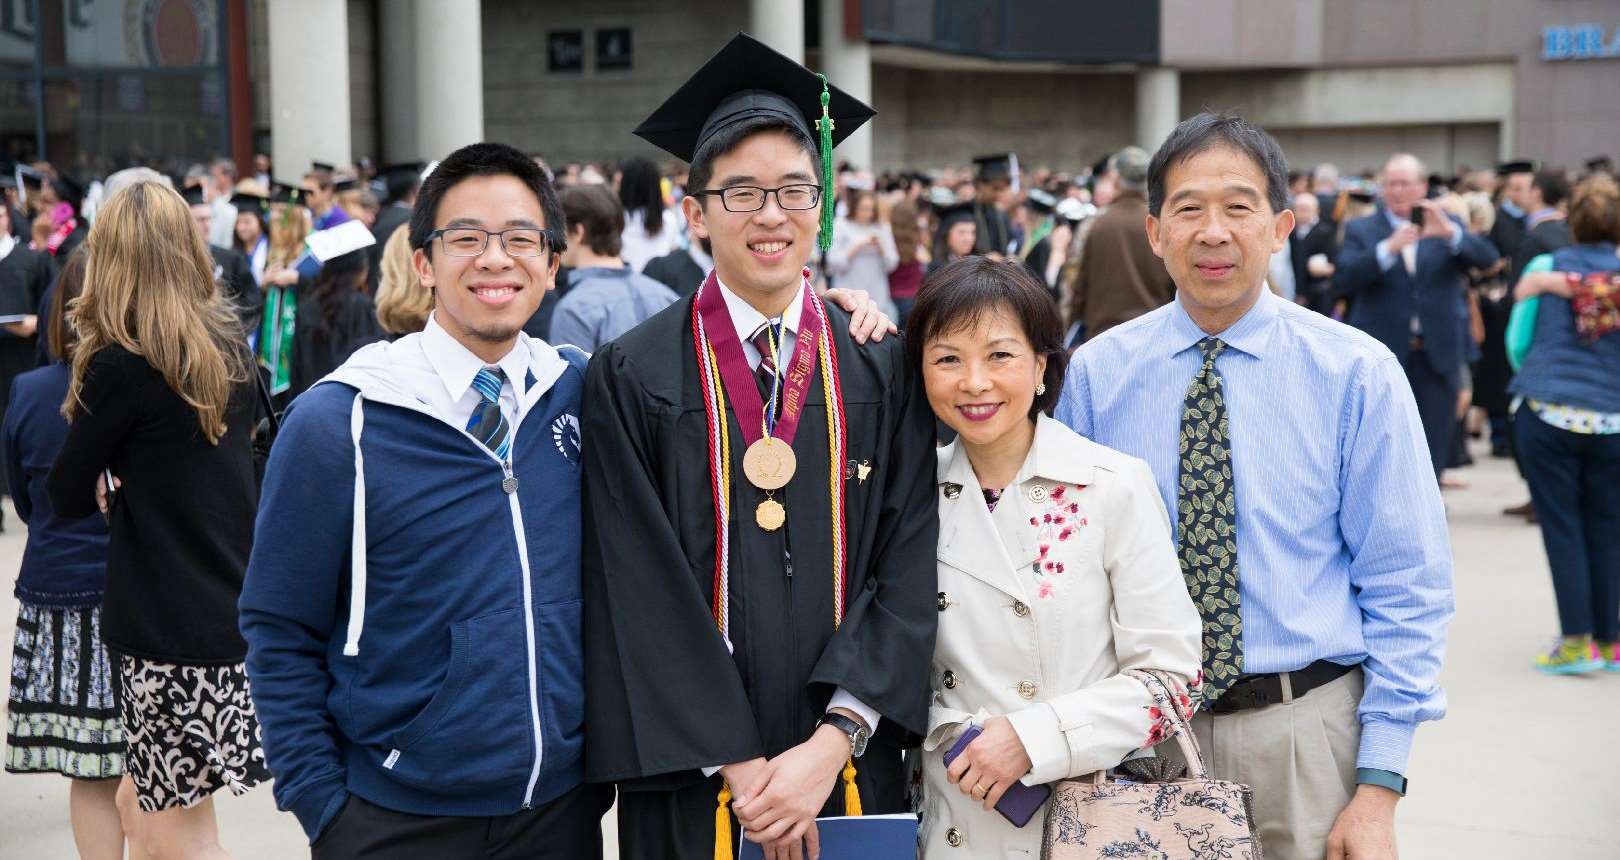 A lasting legacy: MCW physician and mother models resilience for her sons